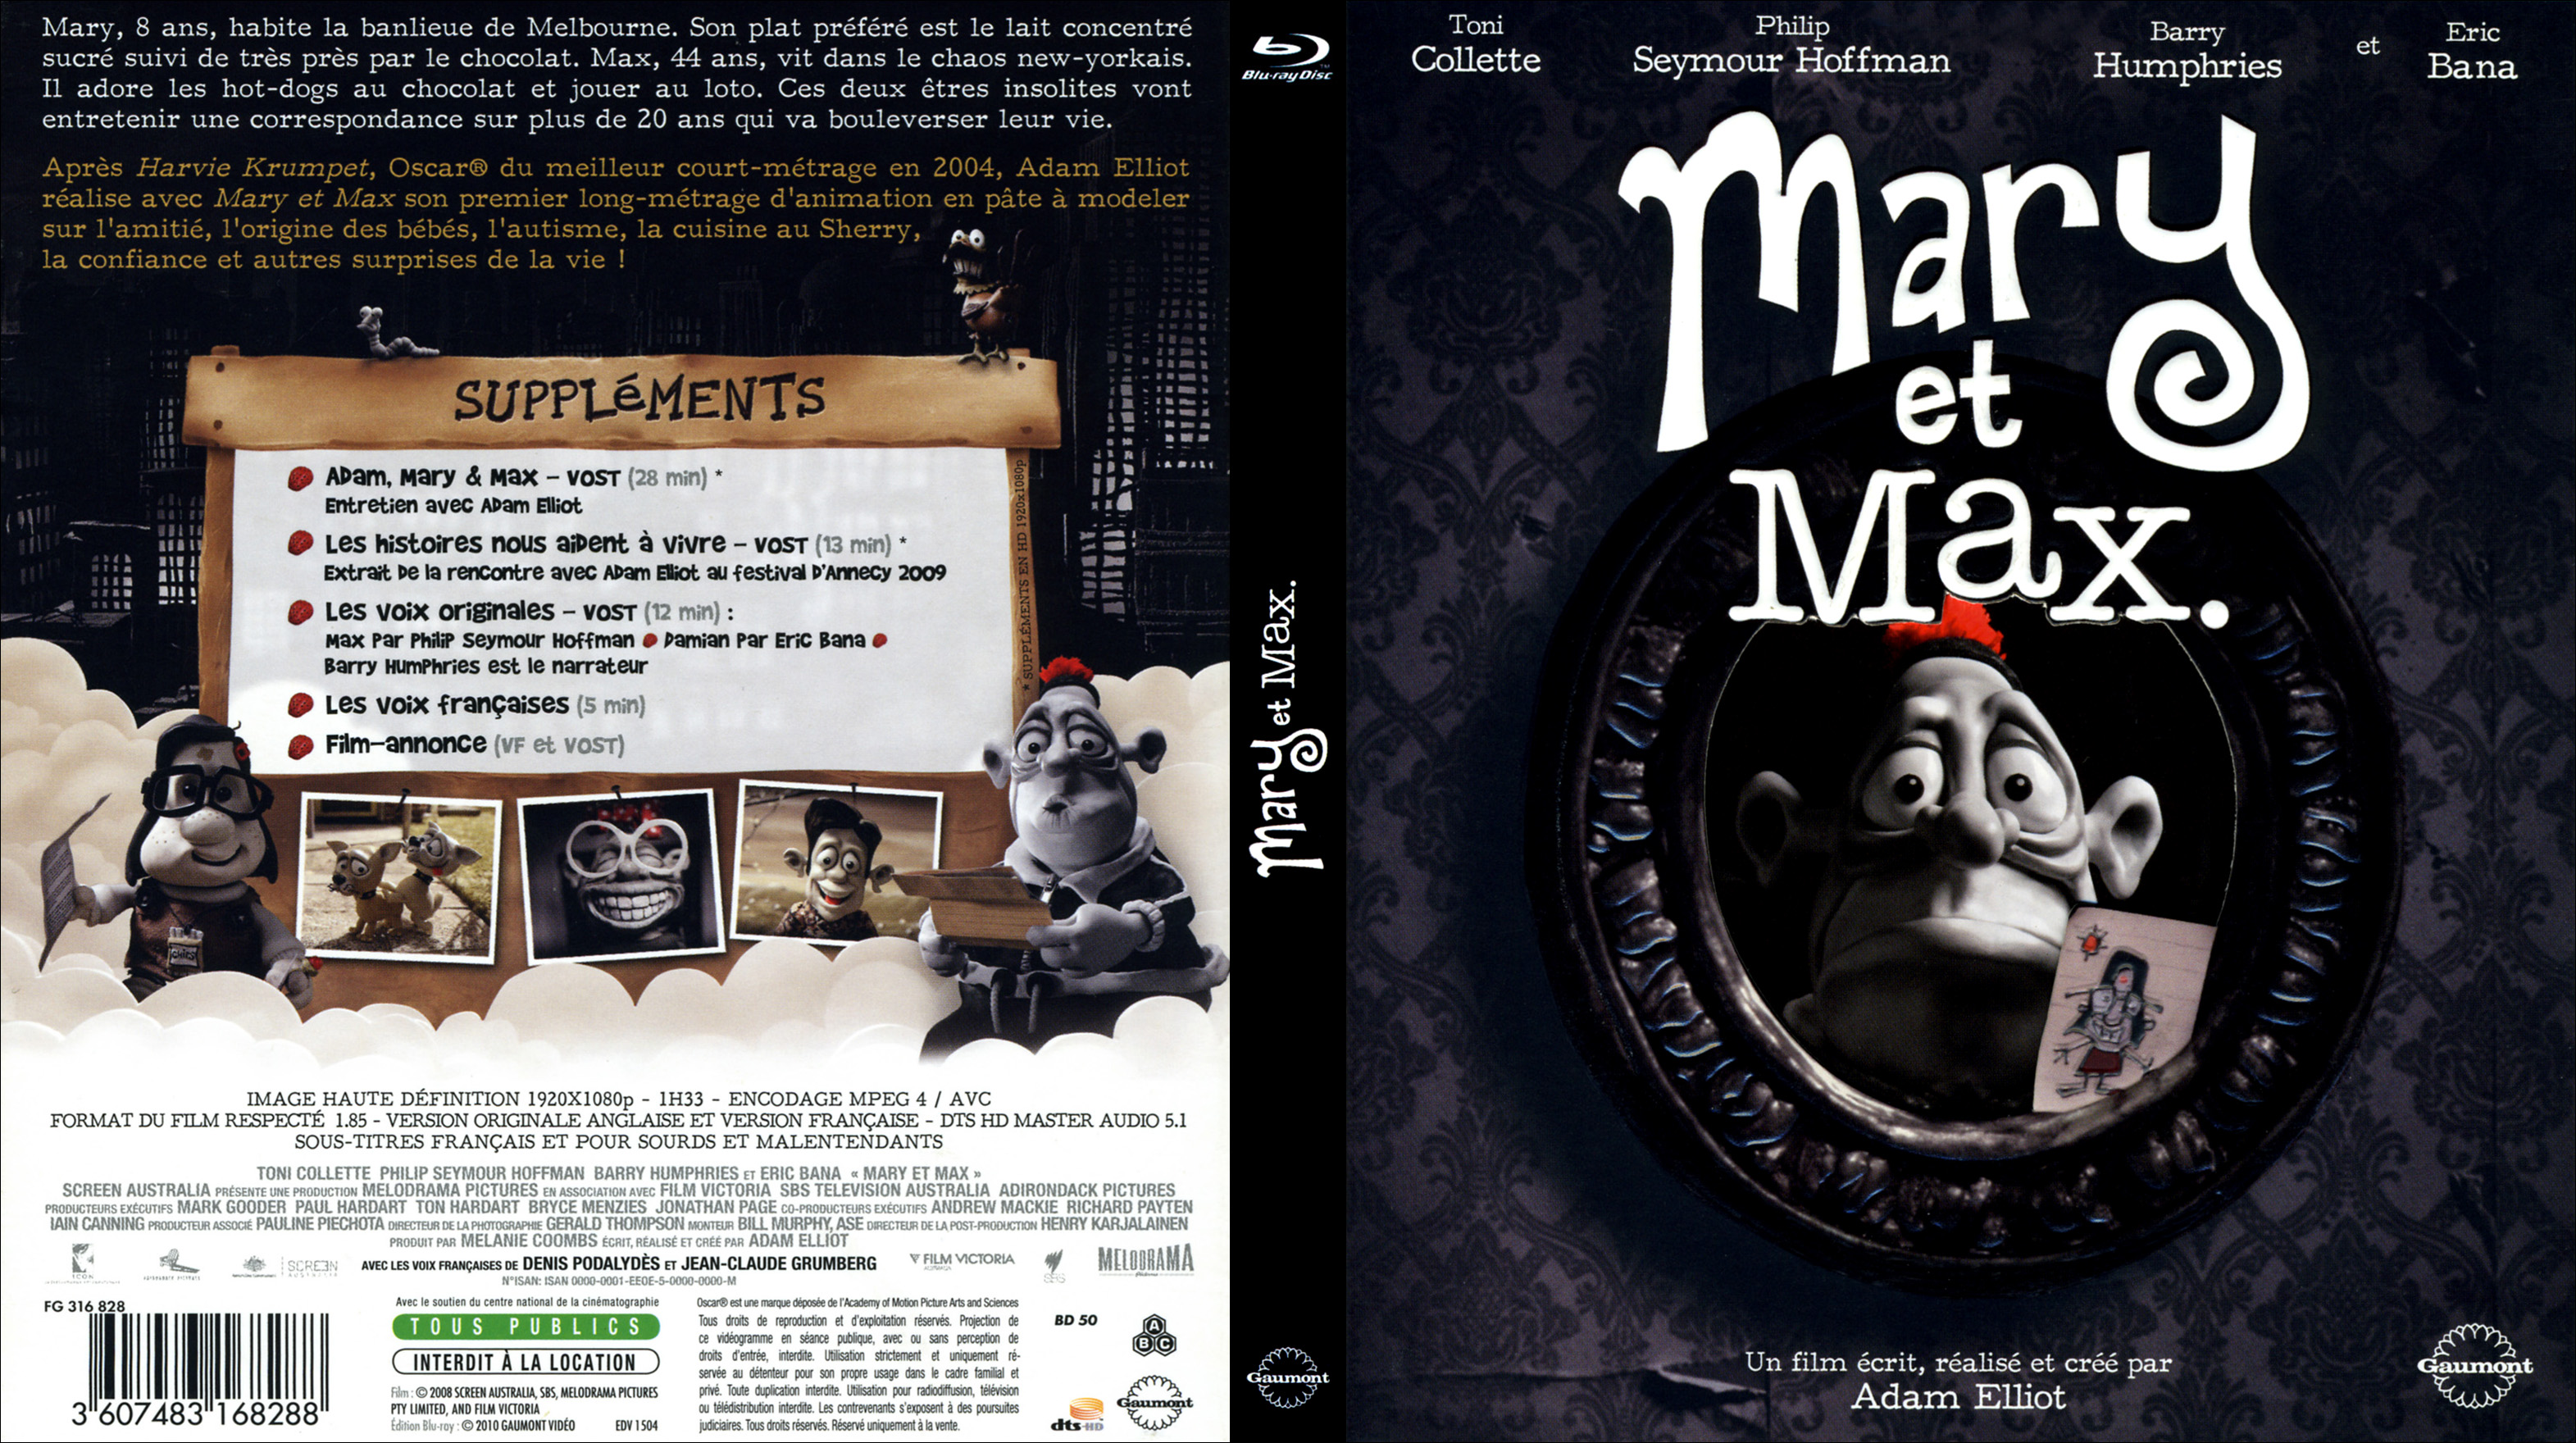 Jaquette DVD Mary et Max (BLU-RAY)